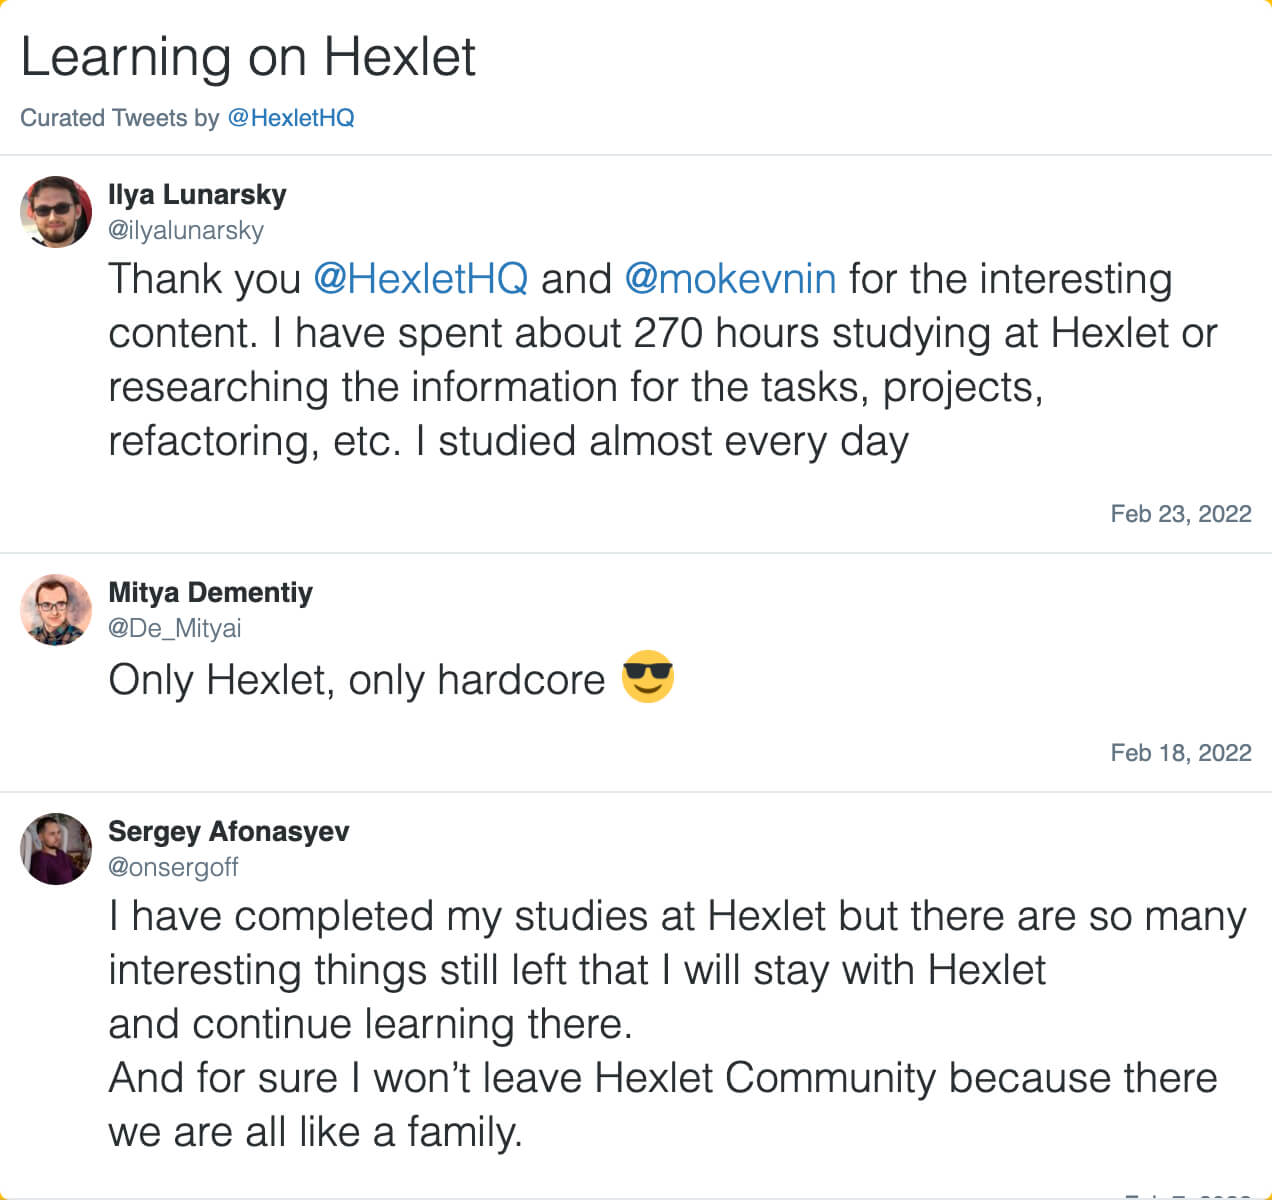 Twitter posts about Hexlet training